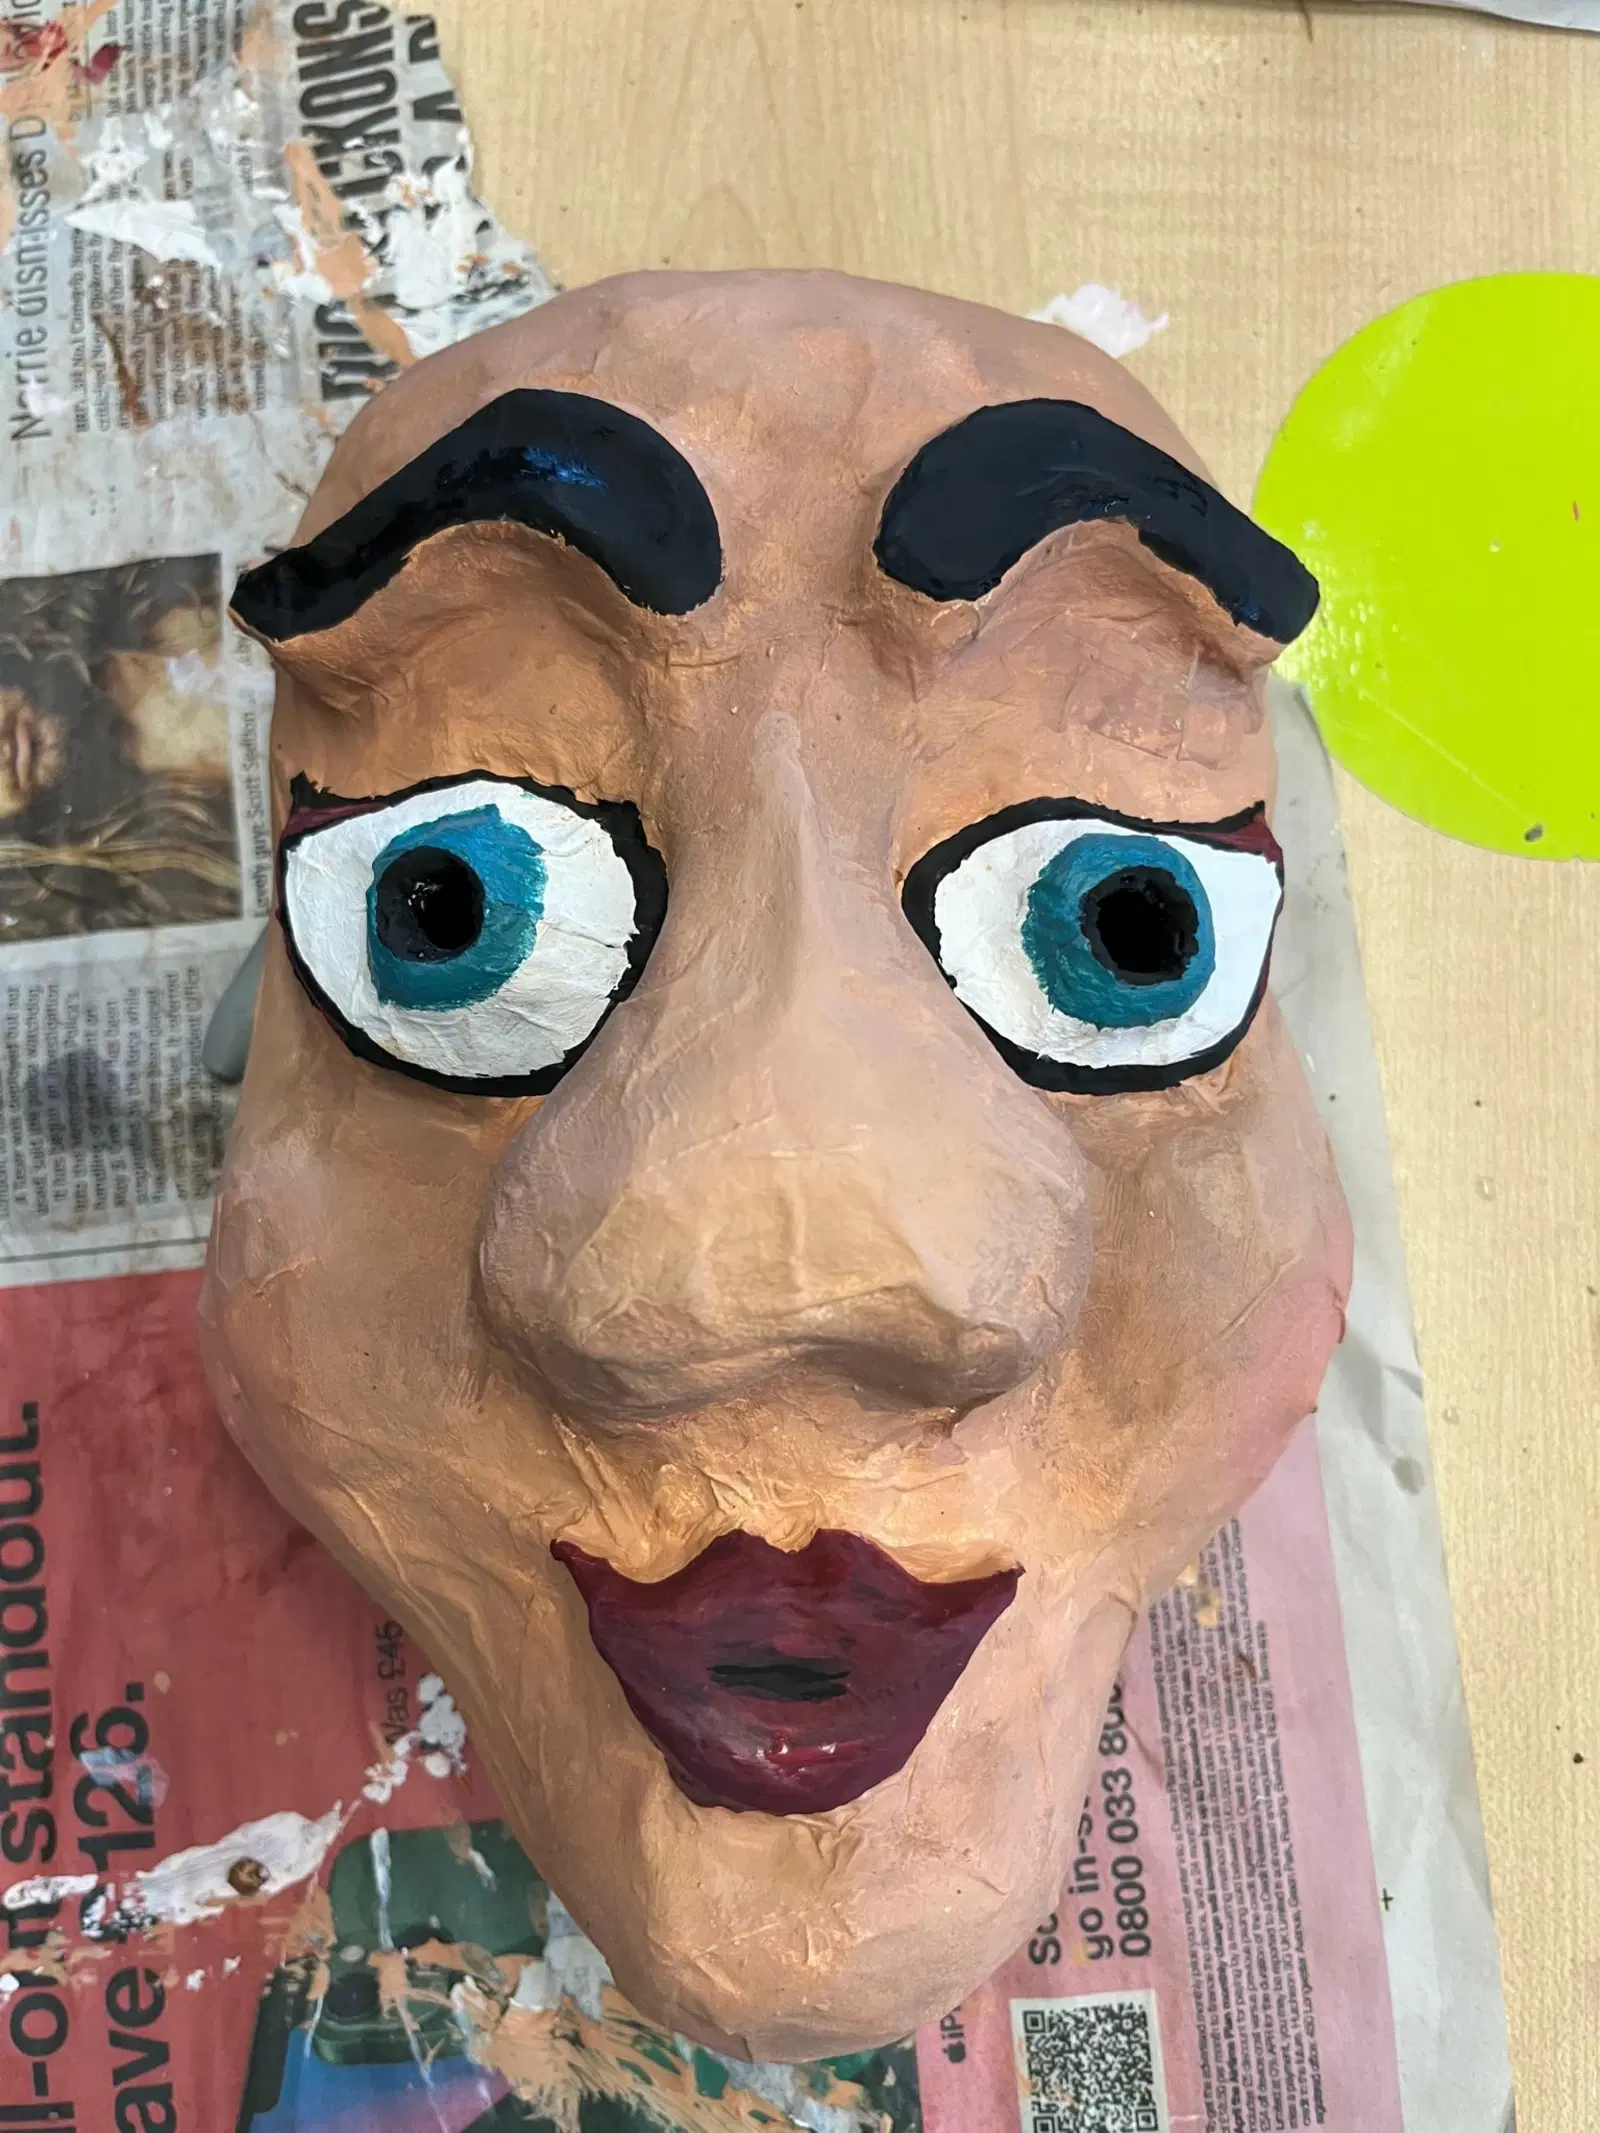 A handcrafted mask with exaggerated features including arched brows, wide eyes, and full lips, resting atop a printed paper surface.